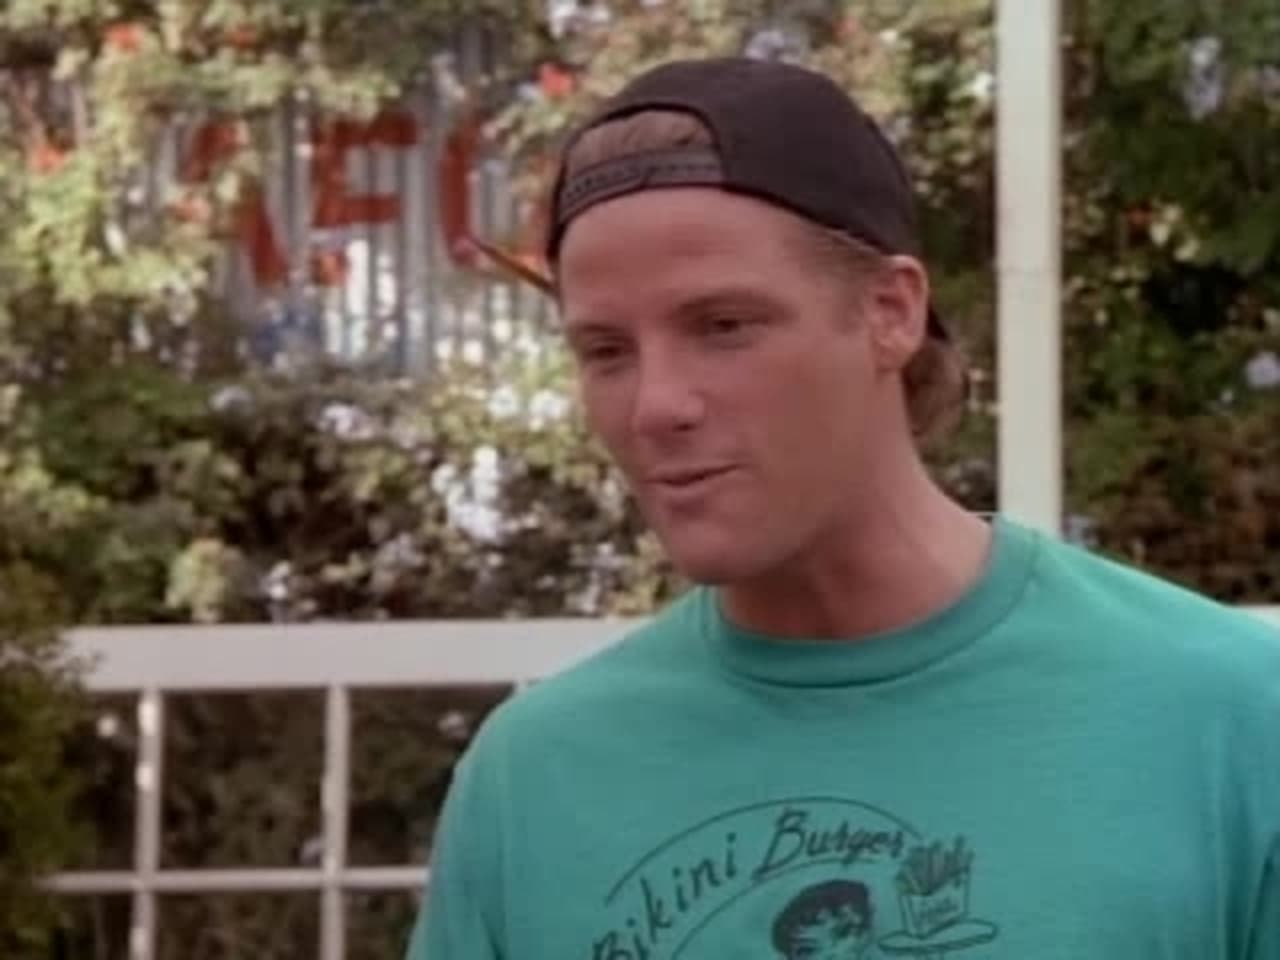 Melrose Place - Season 1 Episode 16 : The Whole Truth